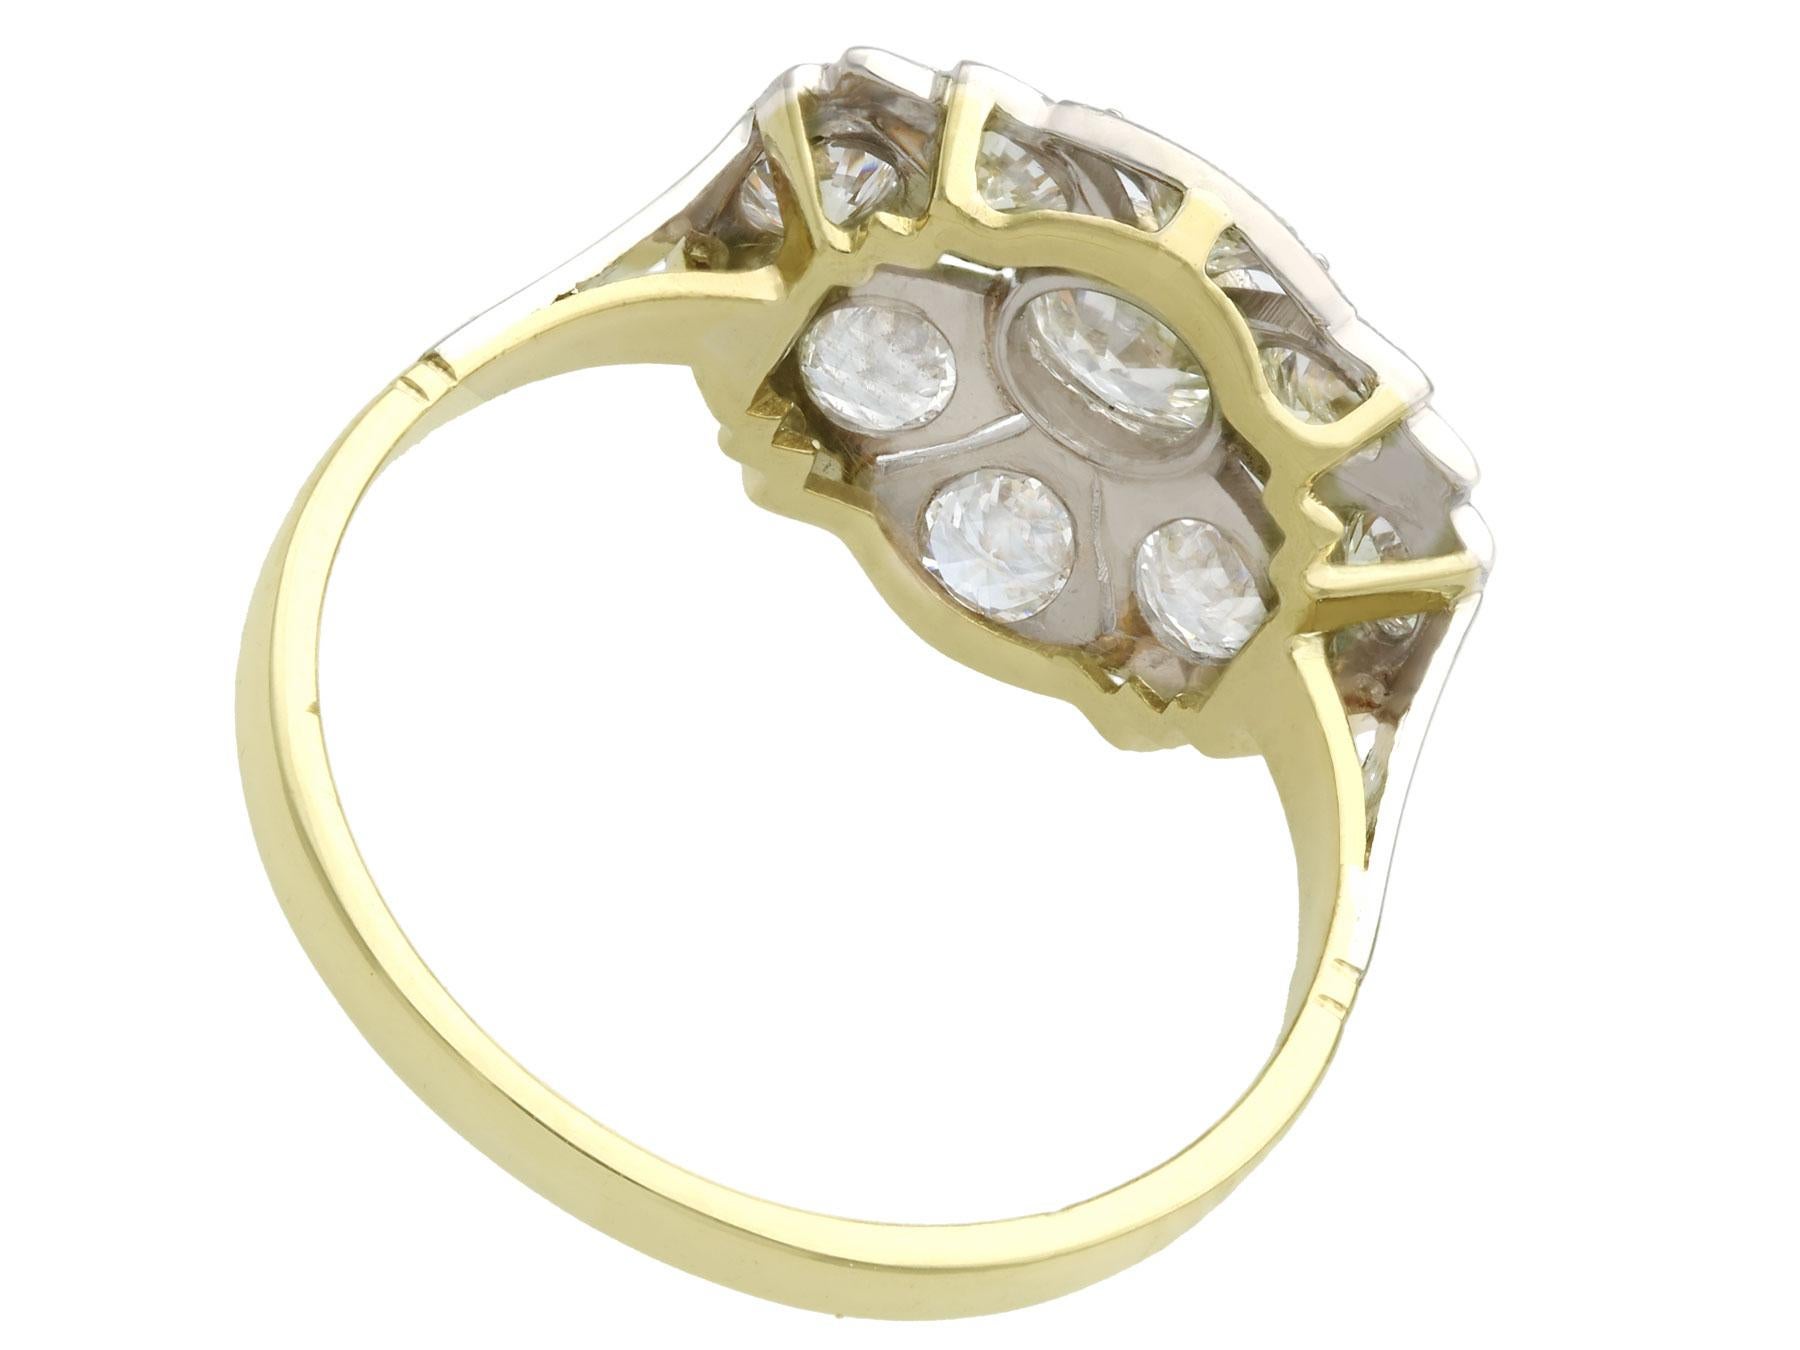 Art Deco 1.42 Carat Diamond and Yellow Gold Cocktail Ring, Circa 1925 In Excellent Condition For Sale In Jesmond, Newcastle Upon Tyne